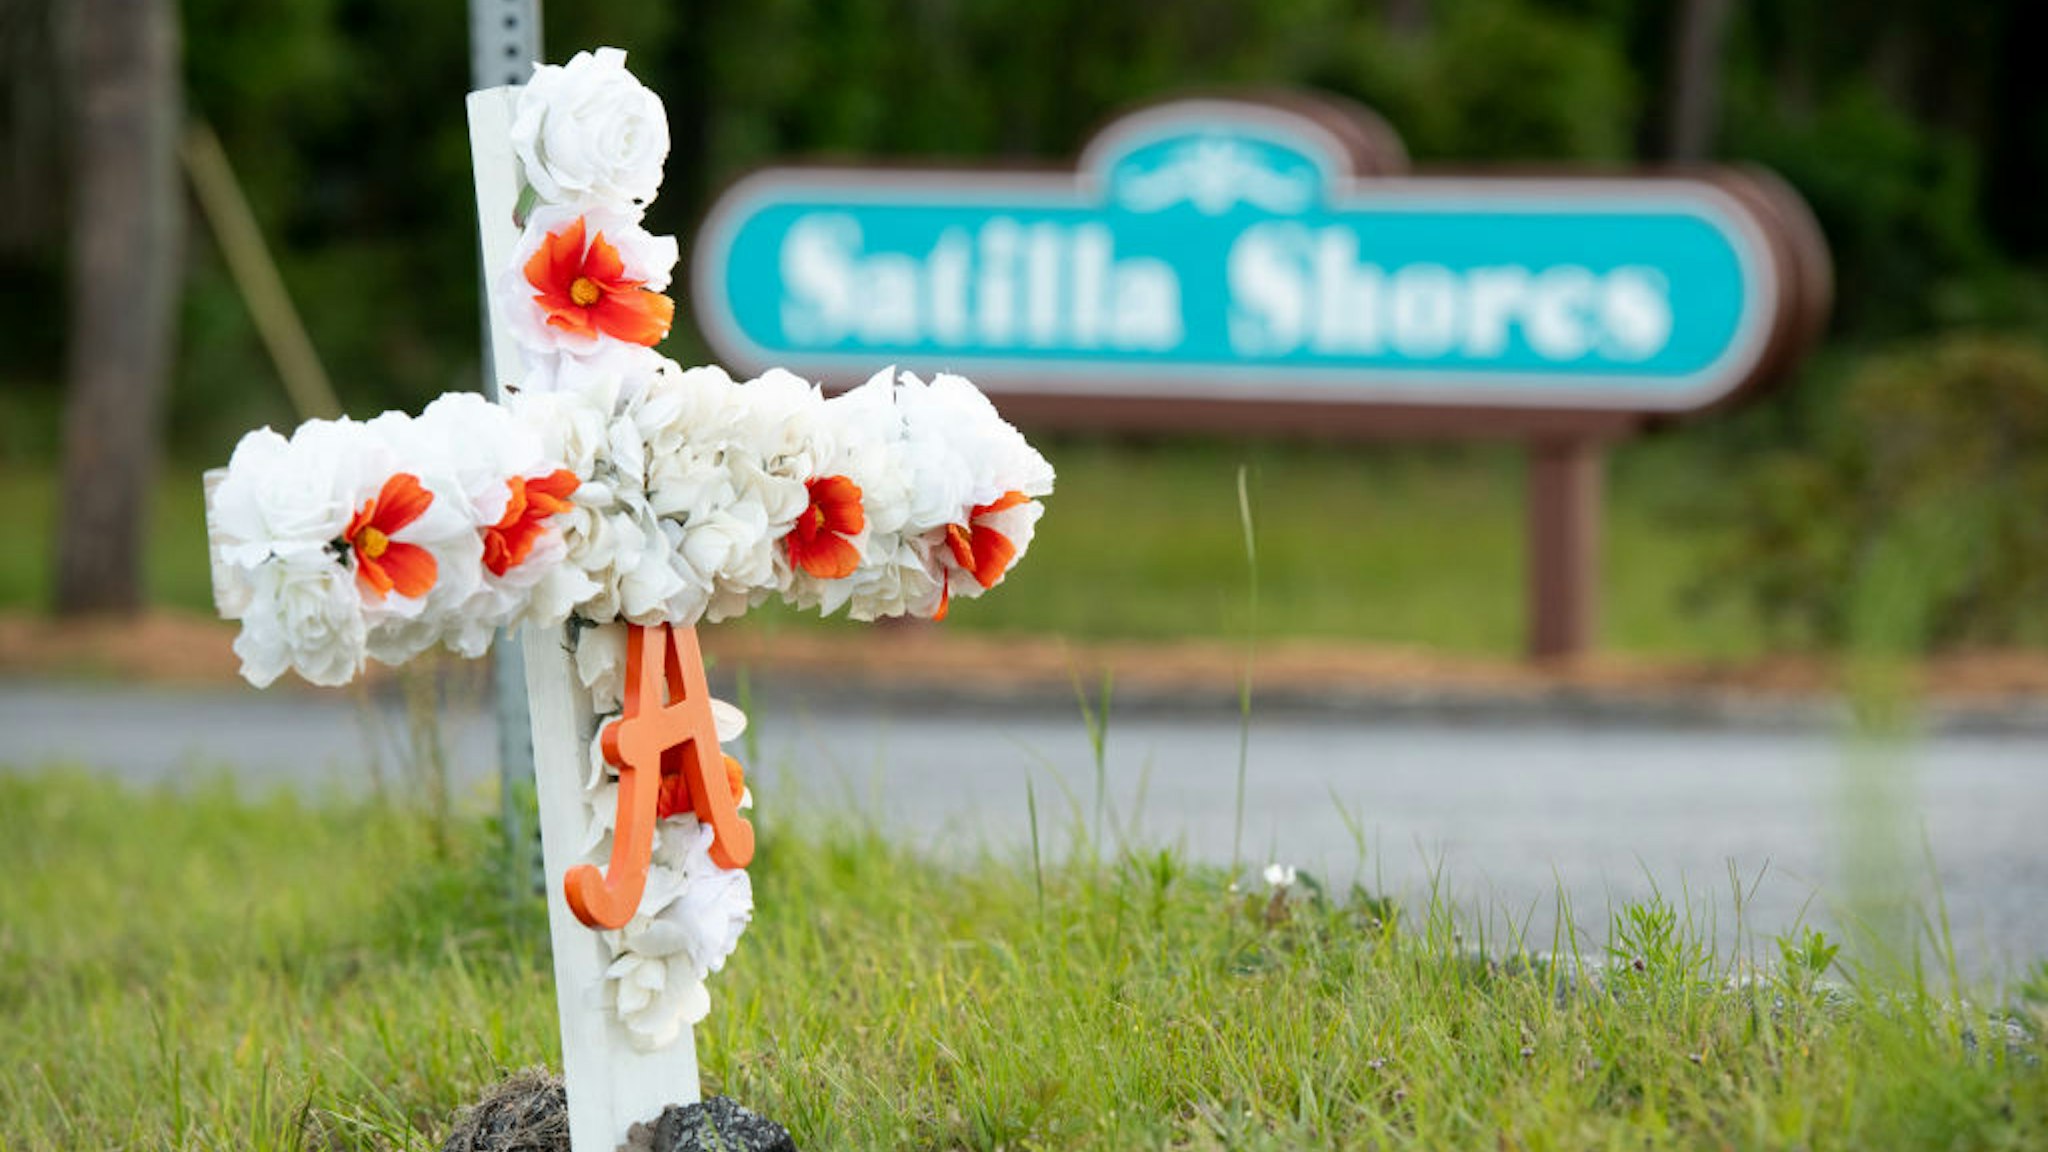 BRUNSWICK, GA - MAY 06: A cross with flowers and a letter "A" sits at the entrance to the Satilla Shores neighborhood where Ahmaud Arbery was shot and killed on May 6, 2020 in Brunswick, Georgia. Attorneys for Arbery released a video that appears to show the 25-year-old being gunned down while jogging during a confrontation with an armed father and son on February 23.